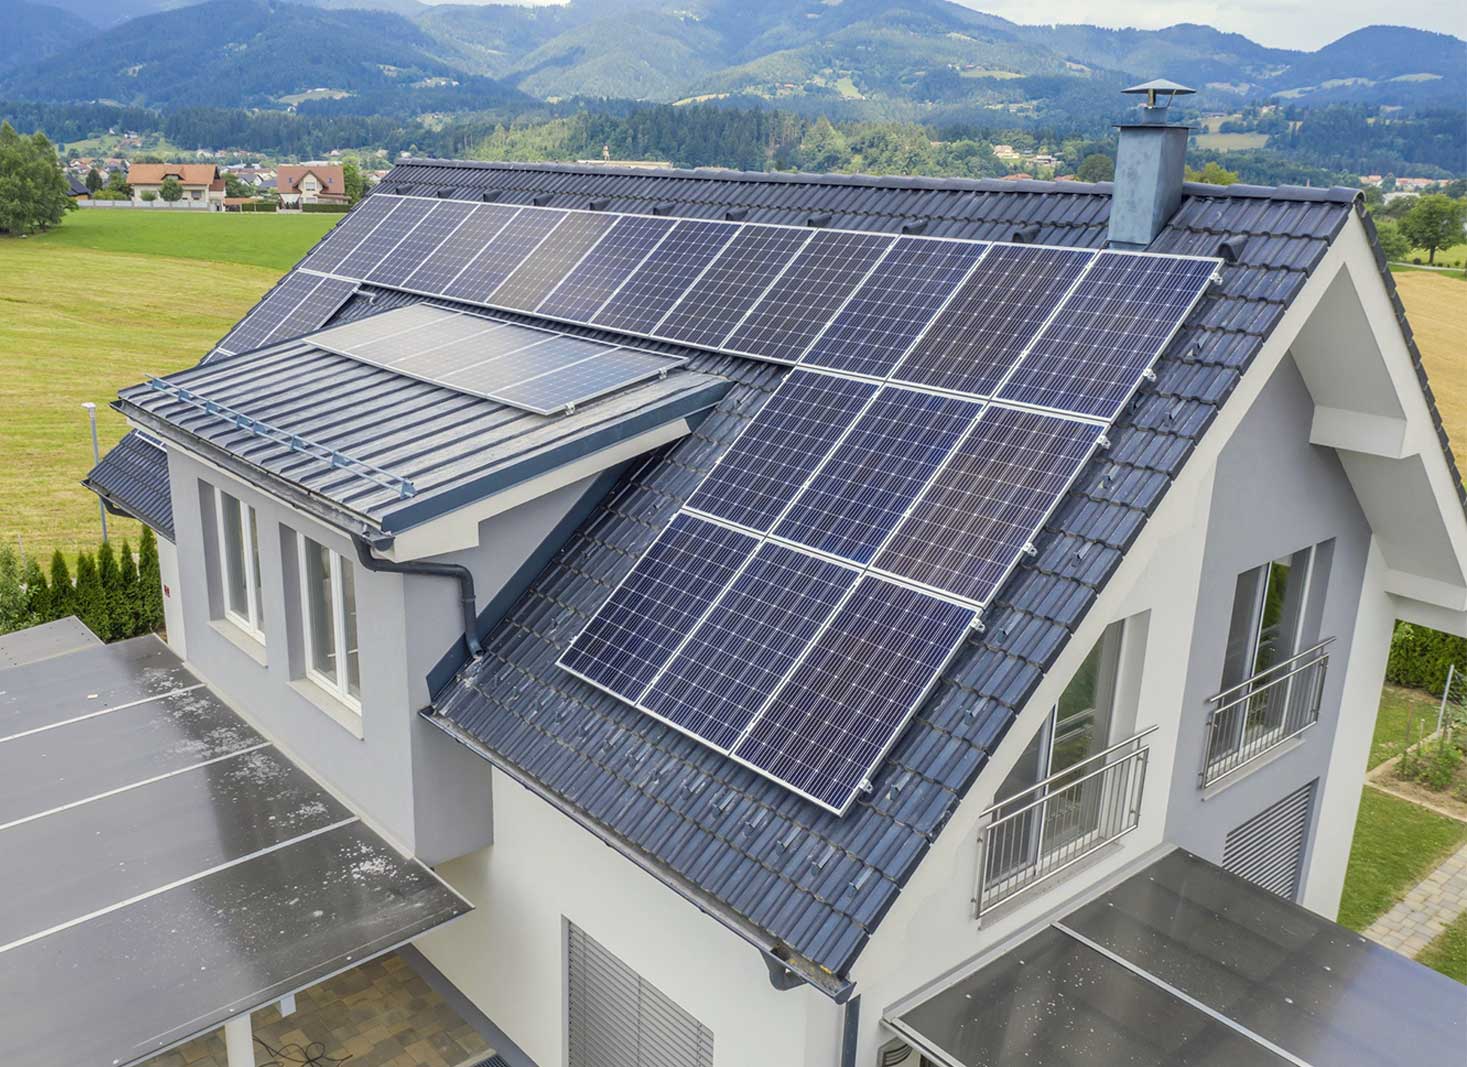 A solar panel system with new materials and designs